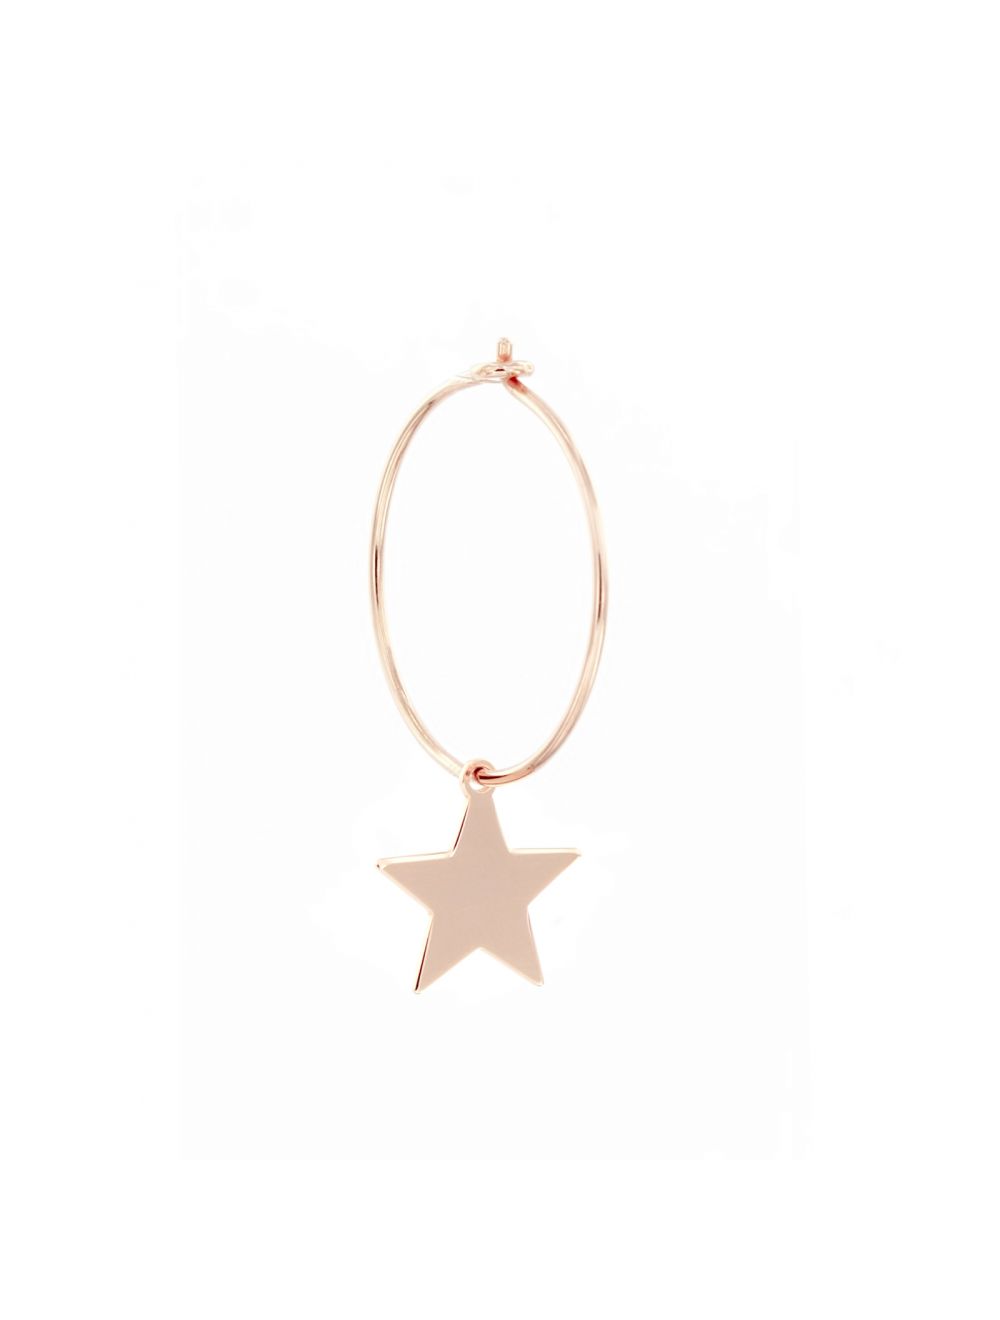 Maman et Sophie Earring Circle Star Silver 925% Pink